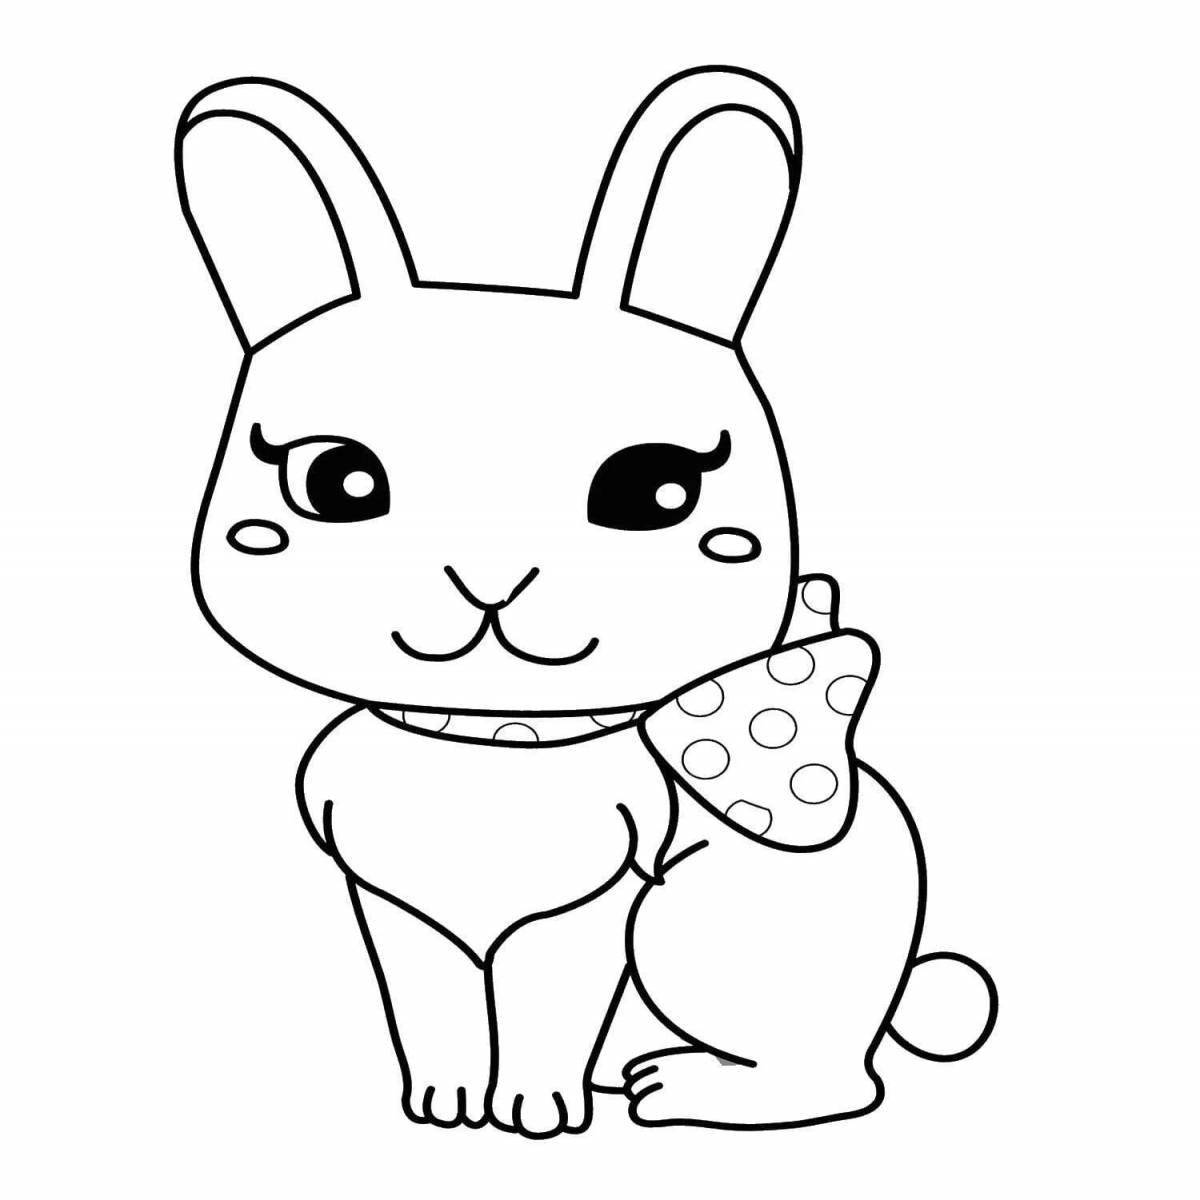 Cute cat and hare coloring page